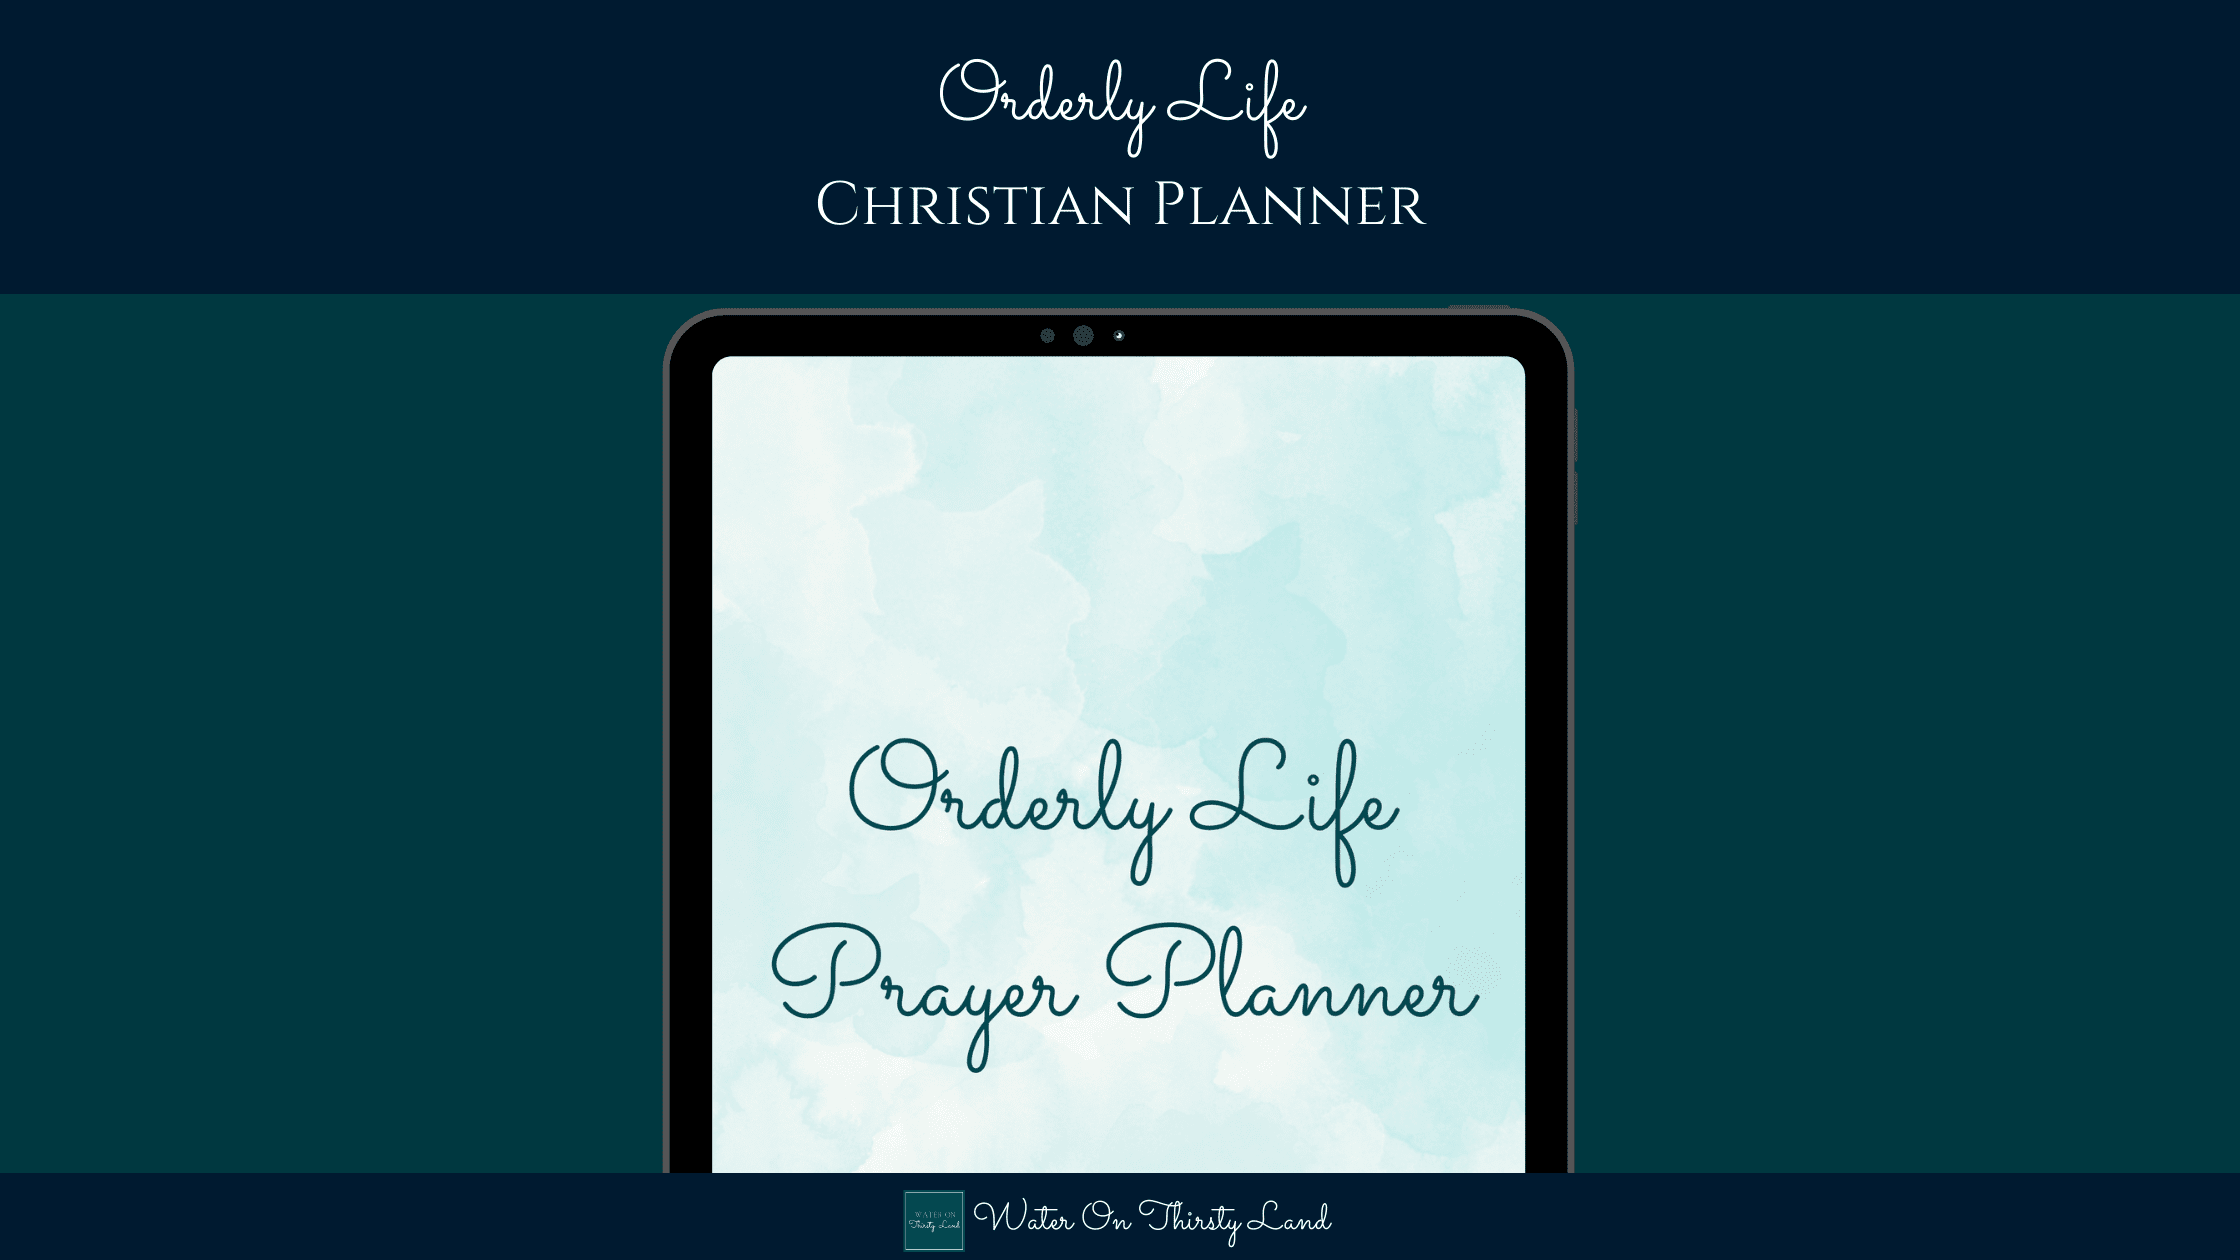 How the Orderly Life Christian Planner has strengthened my faith